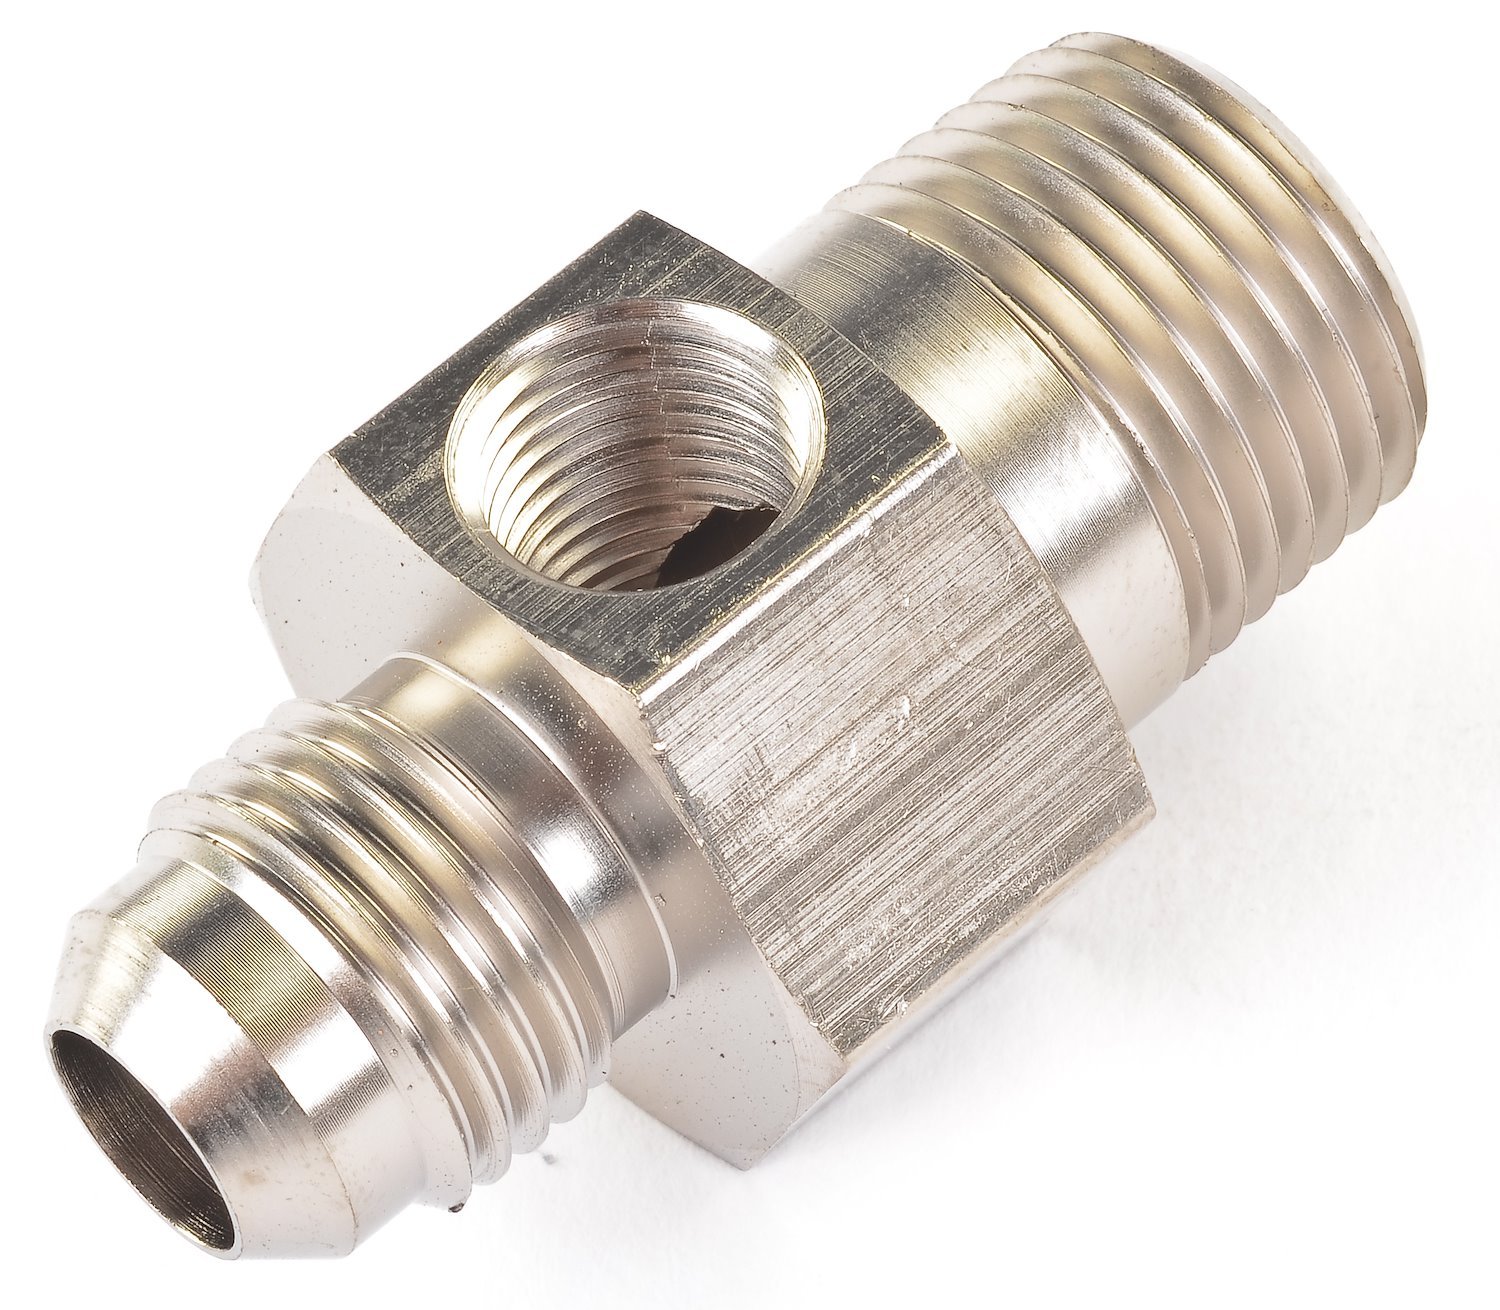 Fuel Pressure Adapter Fitting -6AN Male to 3/8" NPT